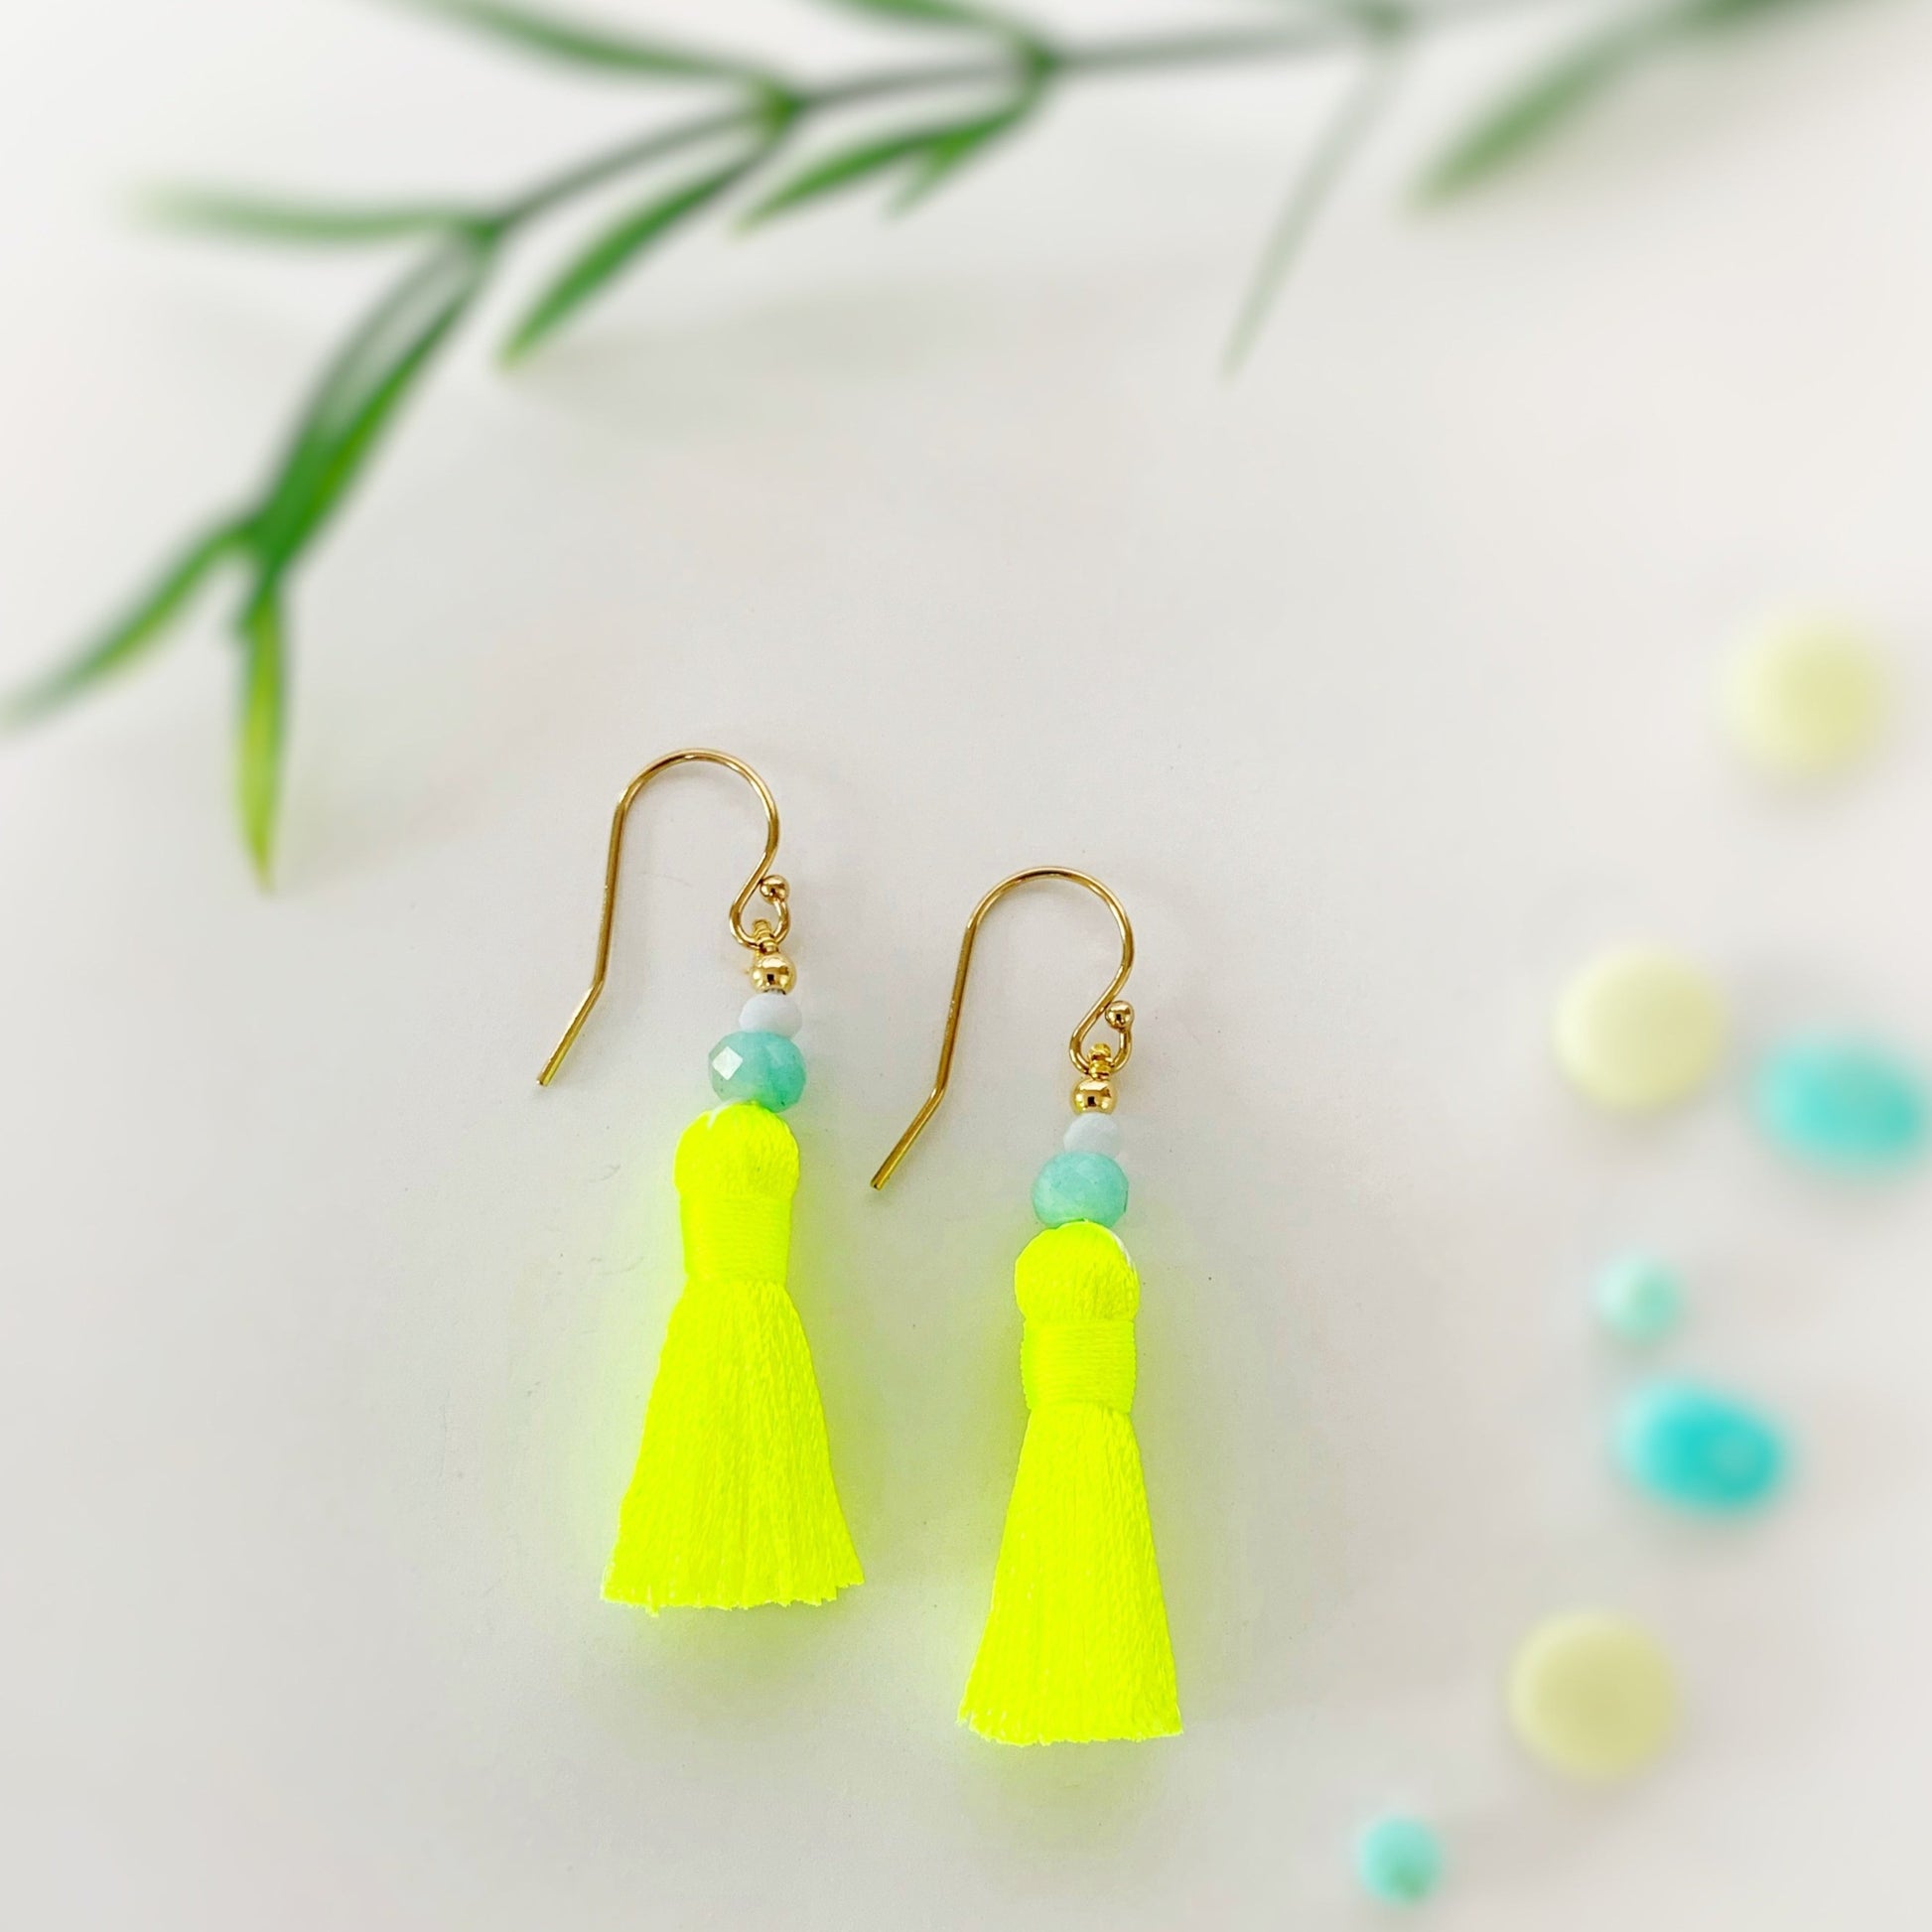 Captiva tassel earrings are from the mermaids and madeleines sunshine collection. They feature bright neon yellow tassels and amazonite and blue lace agate beads and 14k gold filled earring findings. This pair is photographed on a white background with a little bit of blurred greenery near the top of the photo for added interest in the composition of the photo